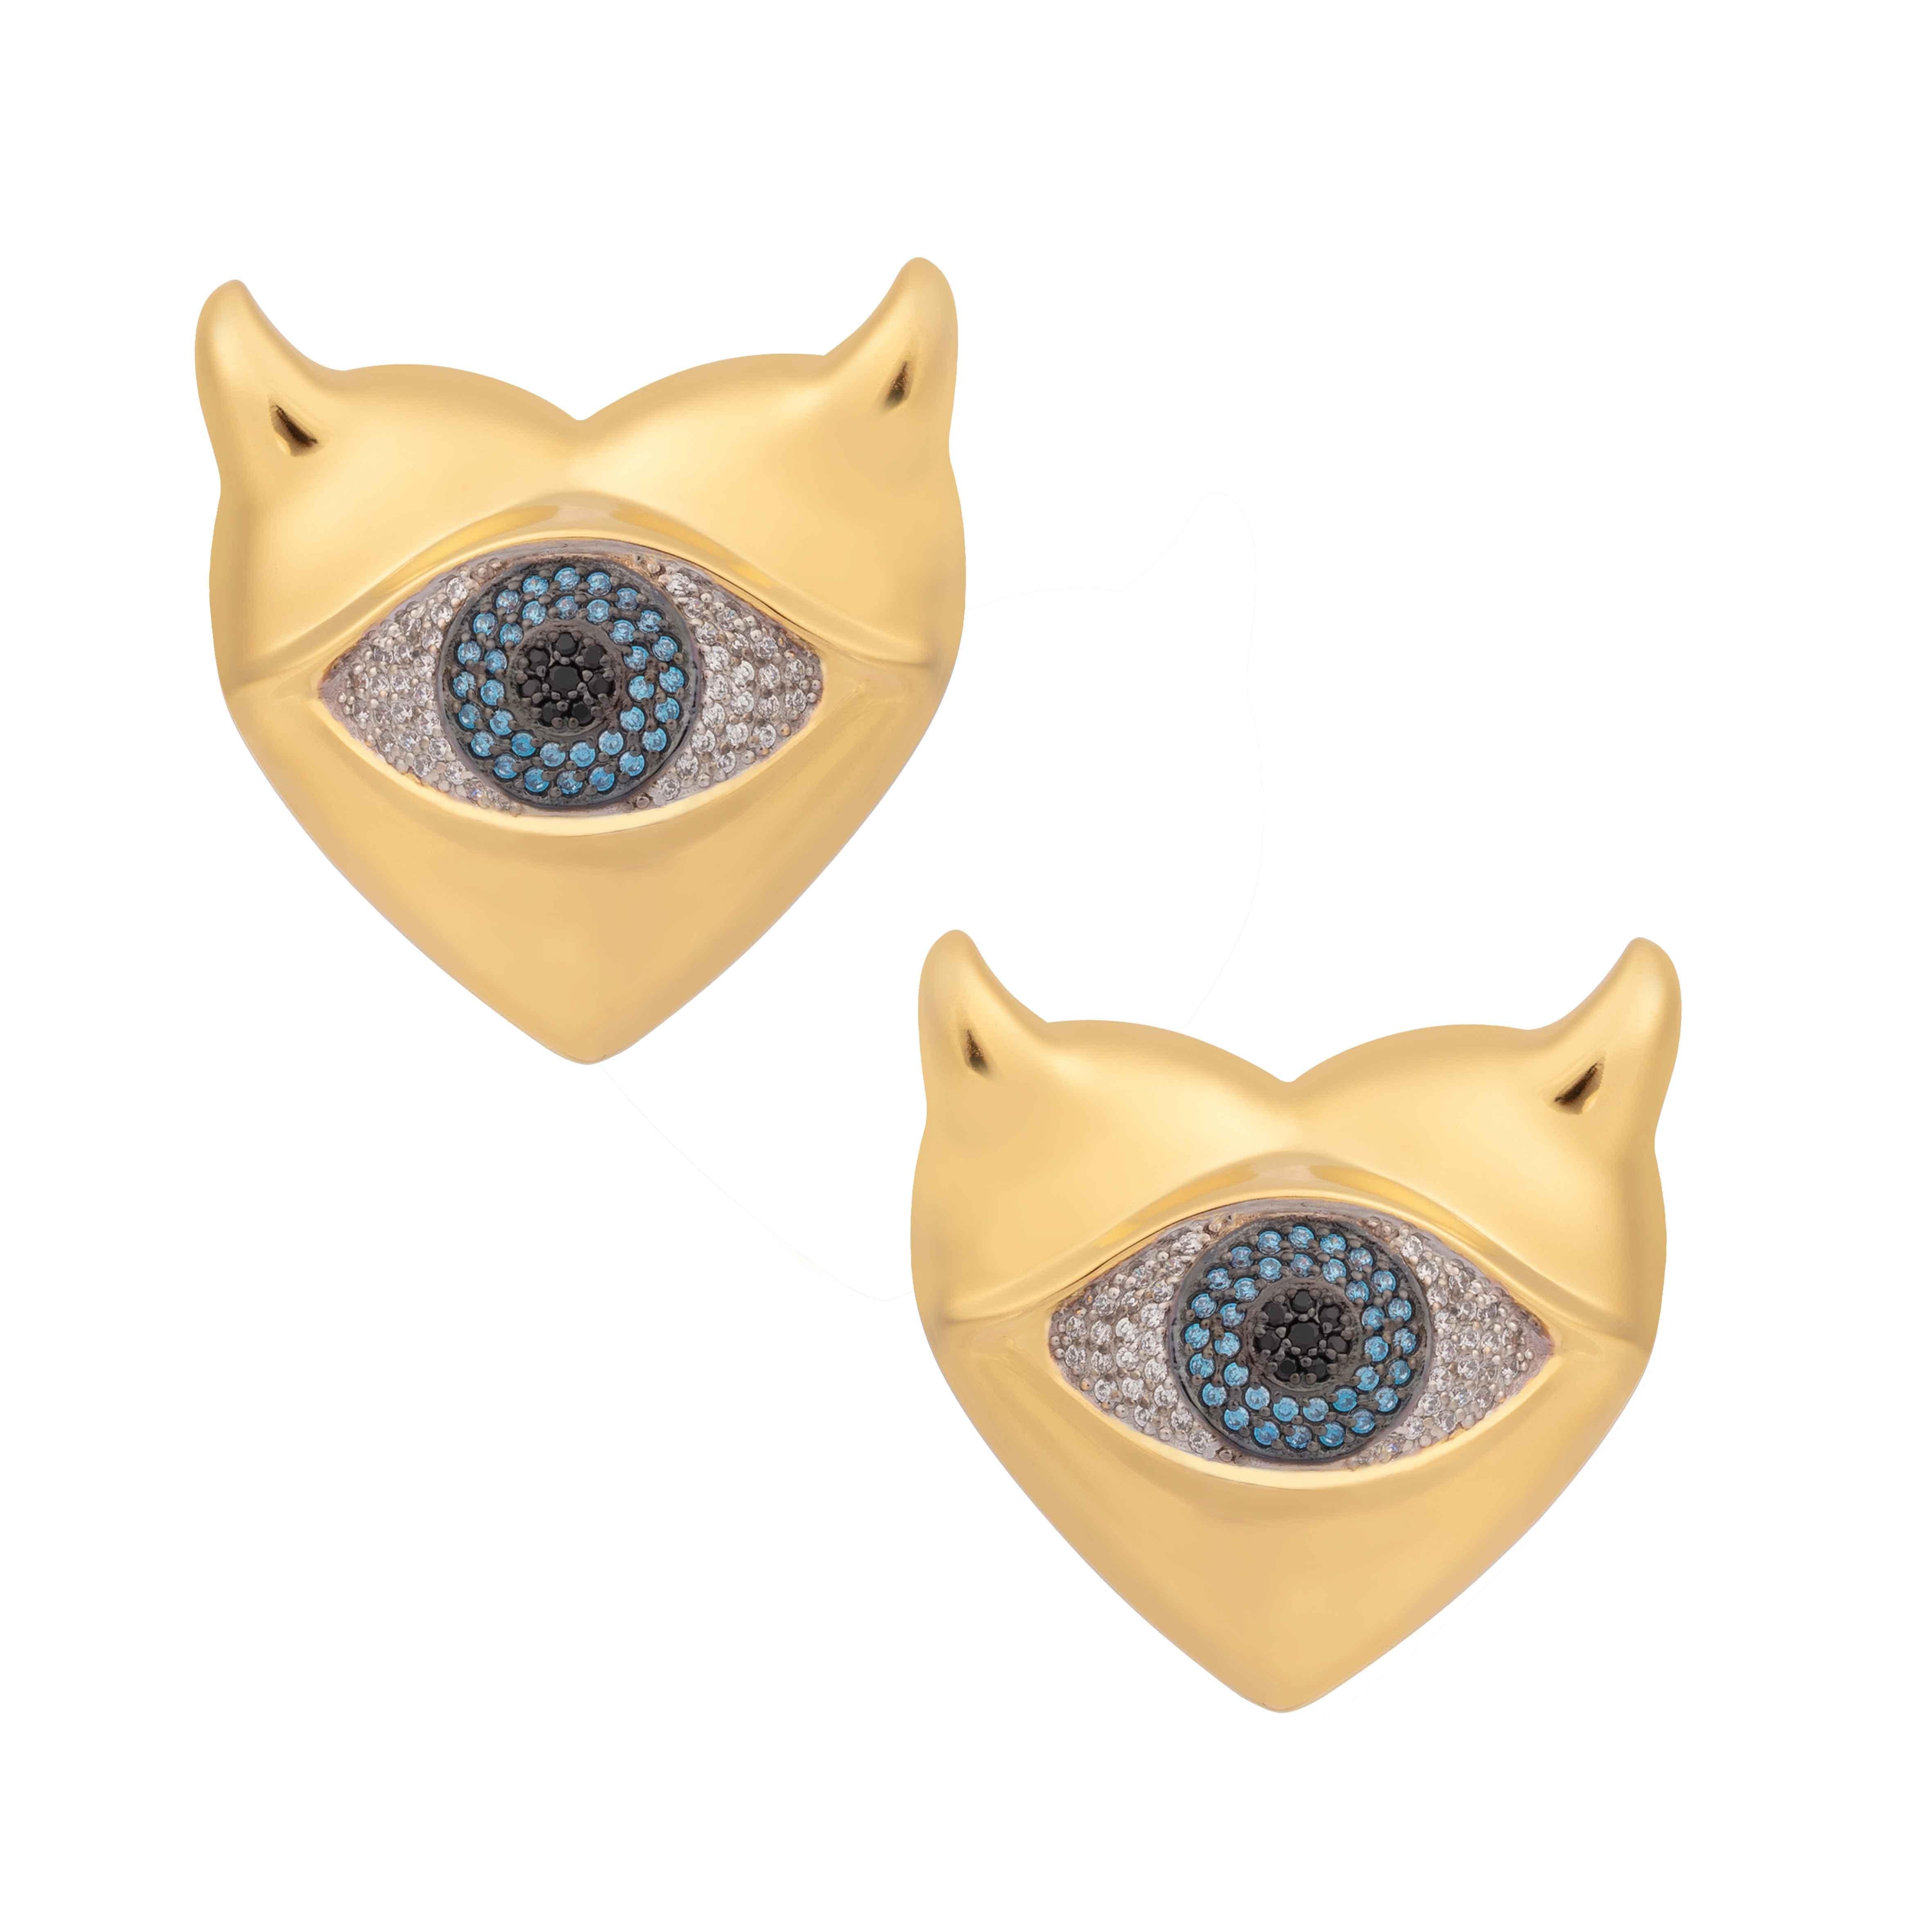 Gold plated Devil Heart Earrings featuring an evil eye. All hand set red crystals, sparkle like rubies. Rock the look and the attitude.

PRODUCT DETAILS:
Composition: 925 Sterling Silver, 18K gold (thick 1 micron coat of 18k yellow gold on a solid